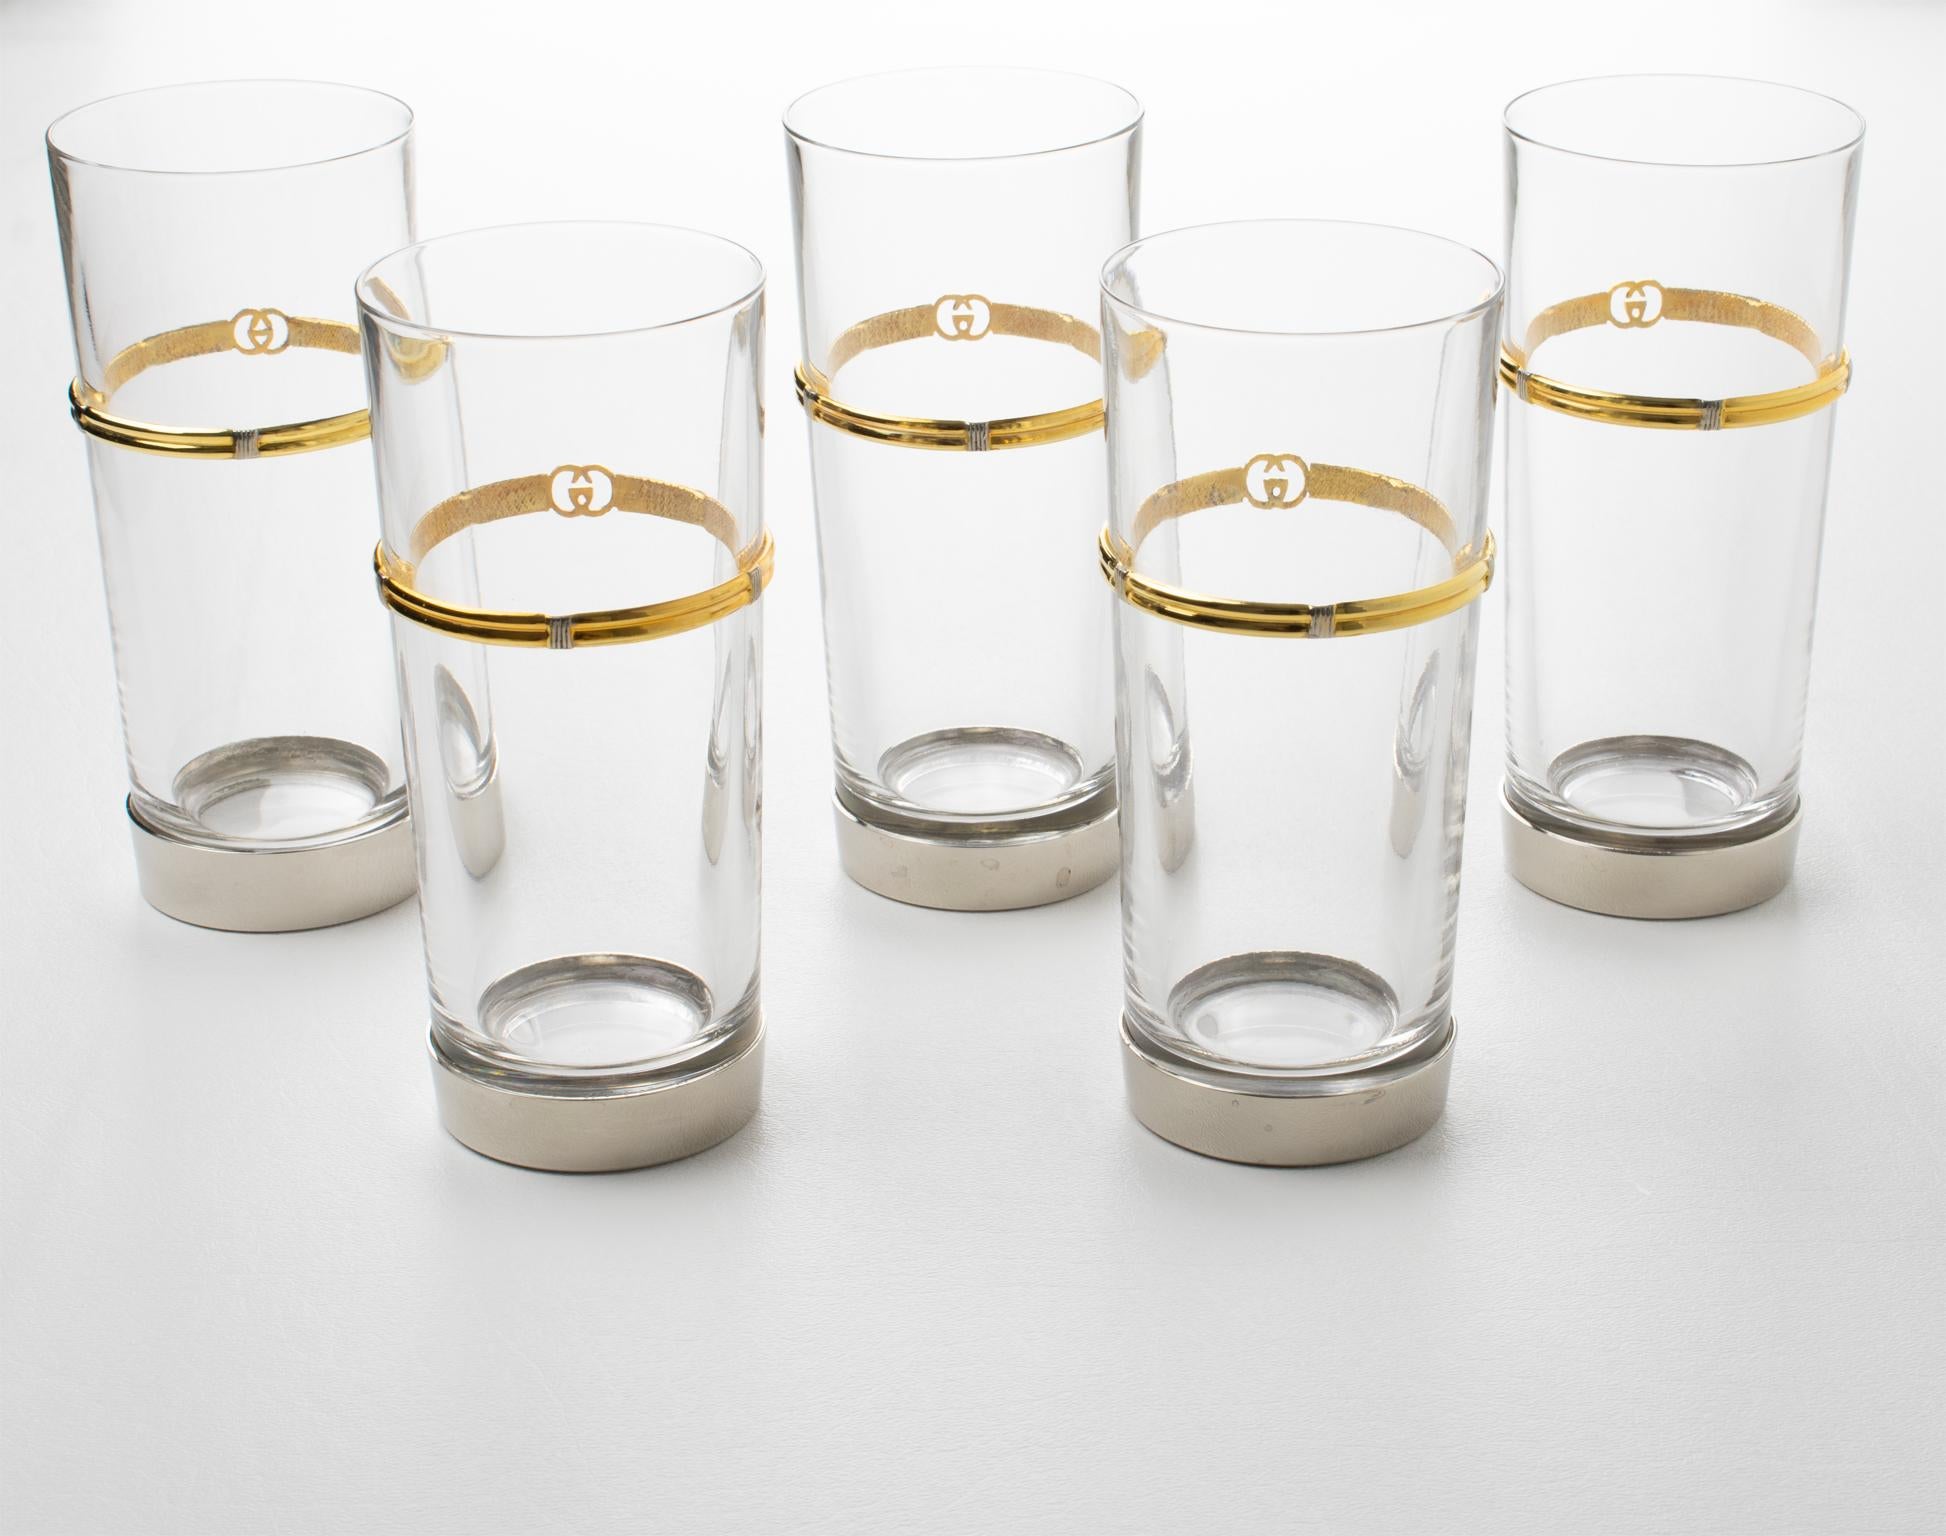 Modern Gucci Italy Barware Set Silver Plate and Crystal HighBall Tumbler Glasses, 5 pc For Sale